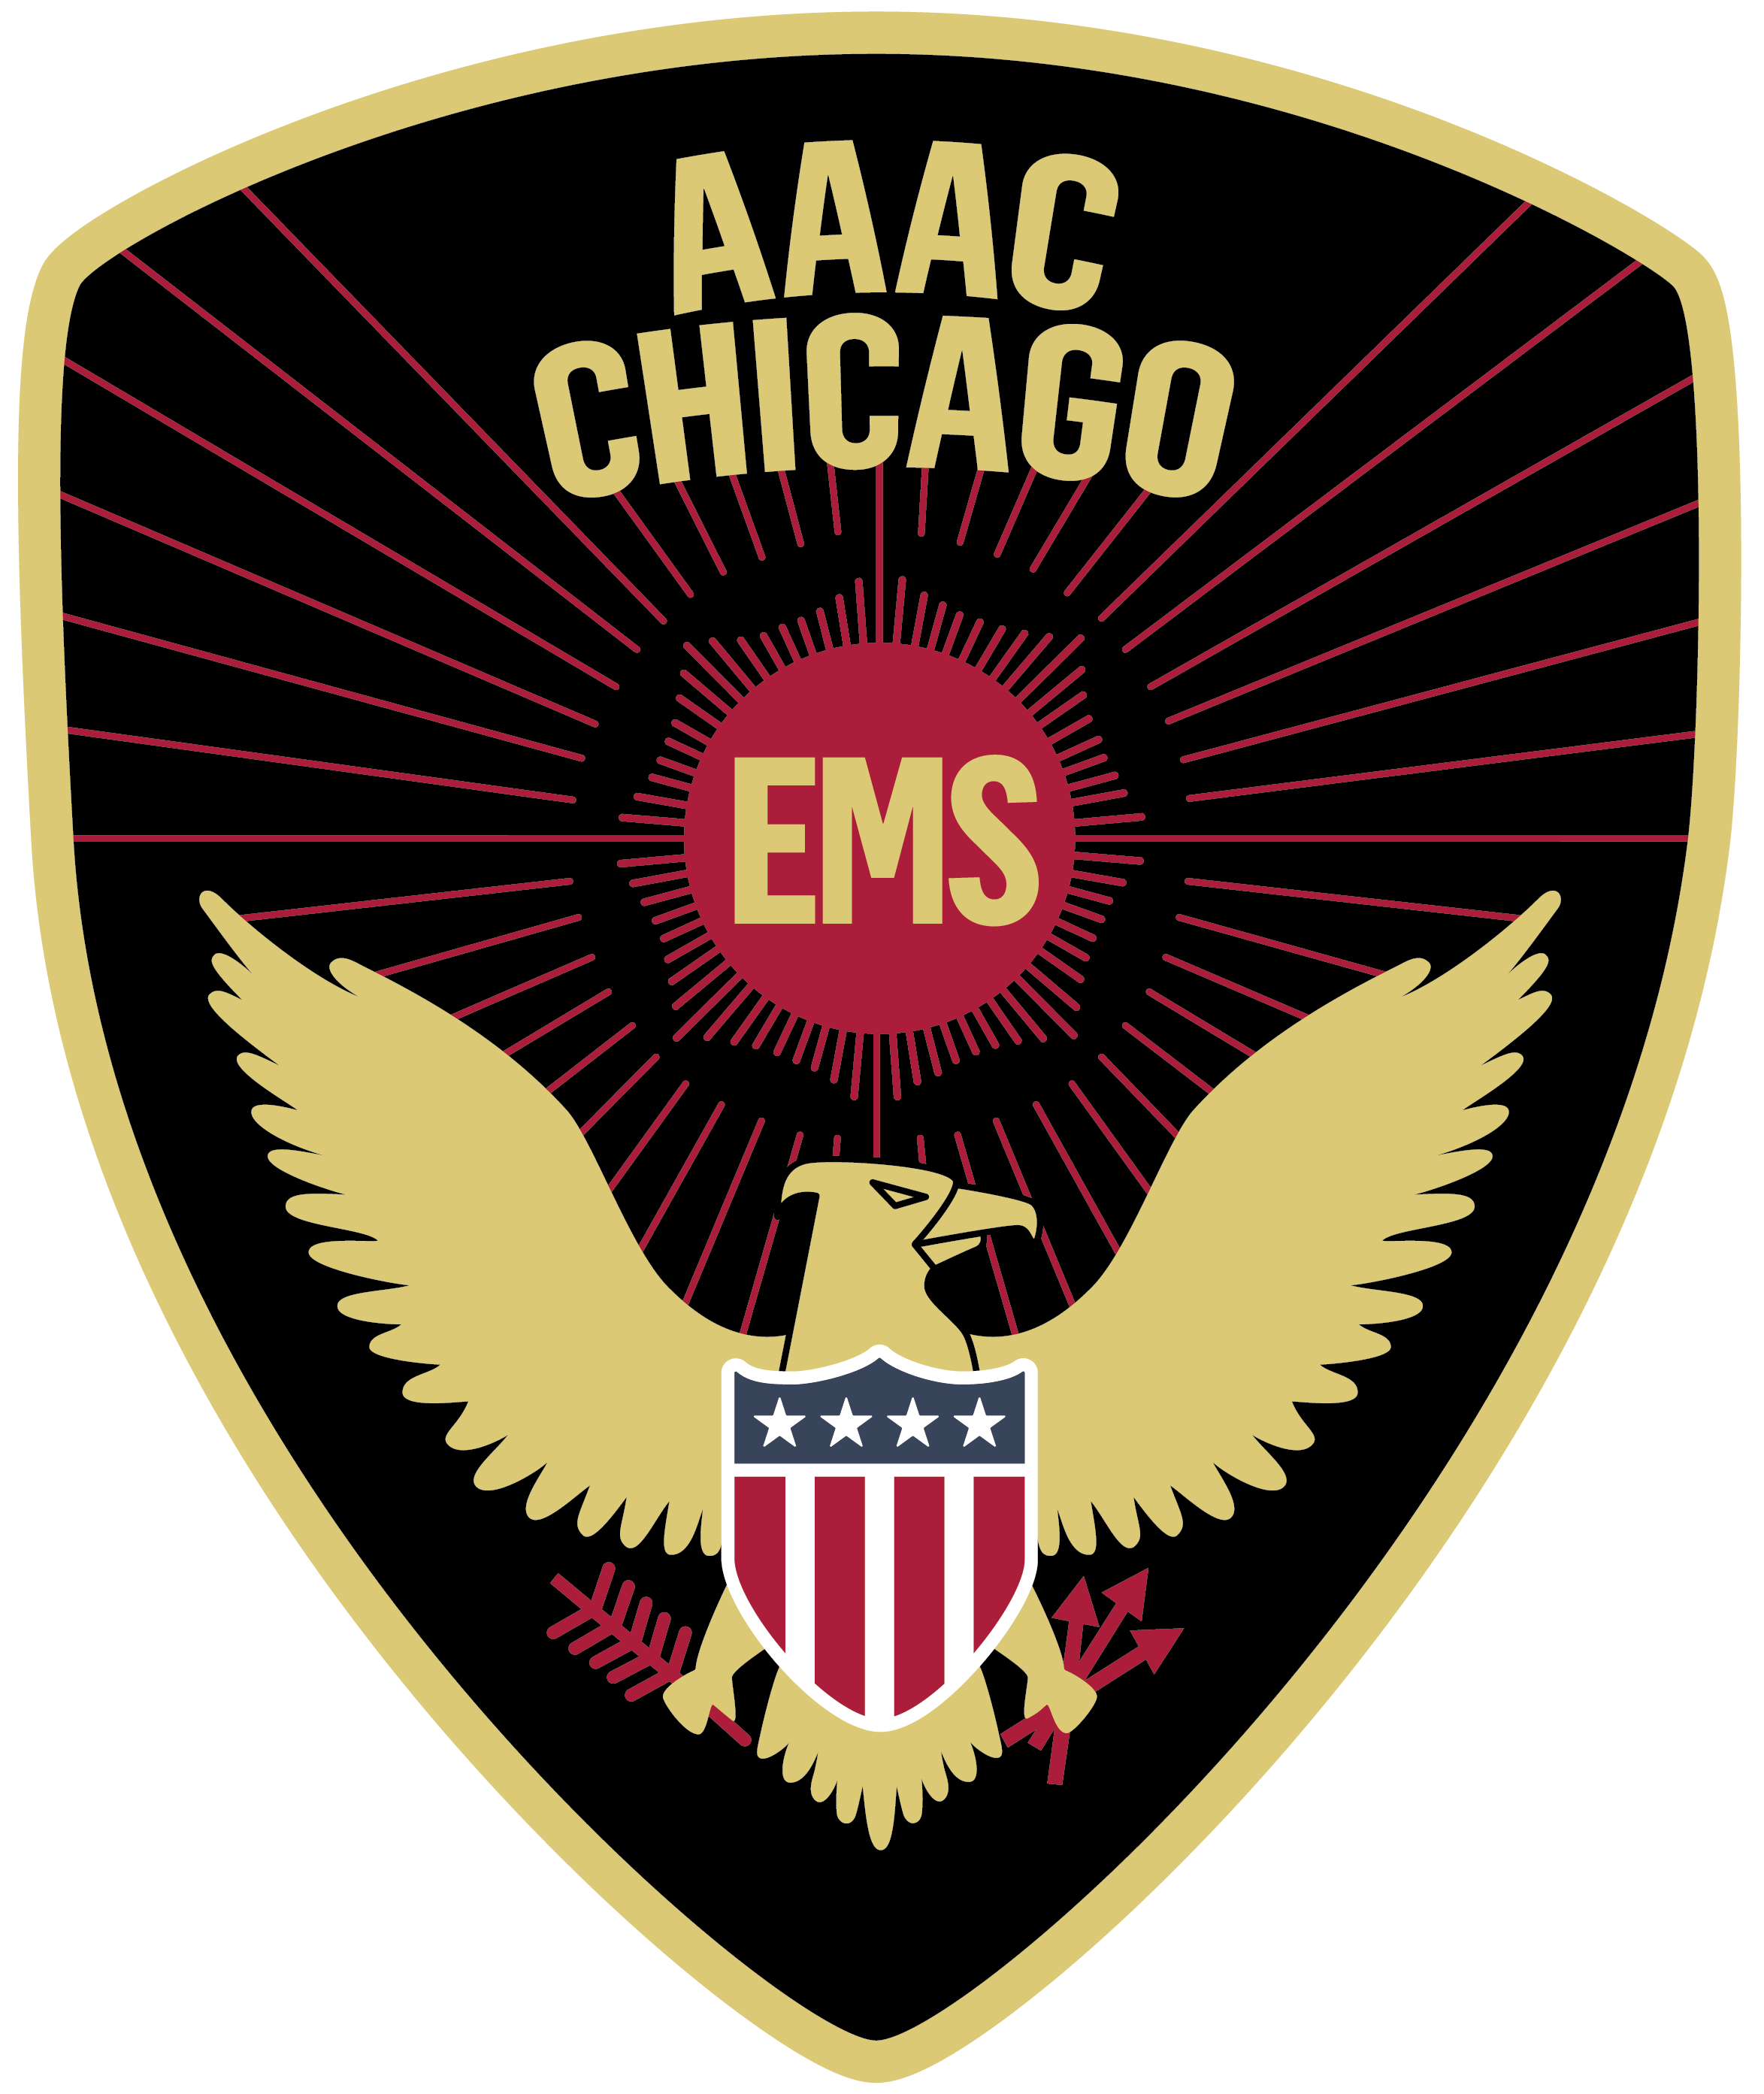 AAAC Chicago EMS